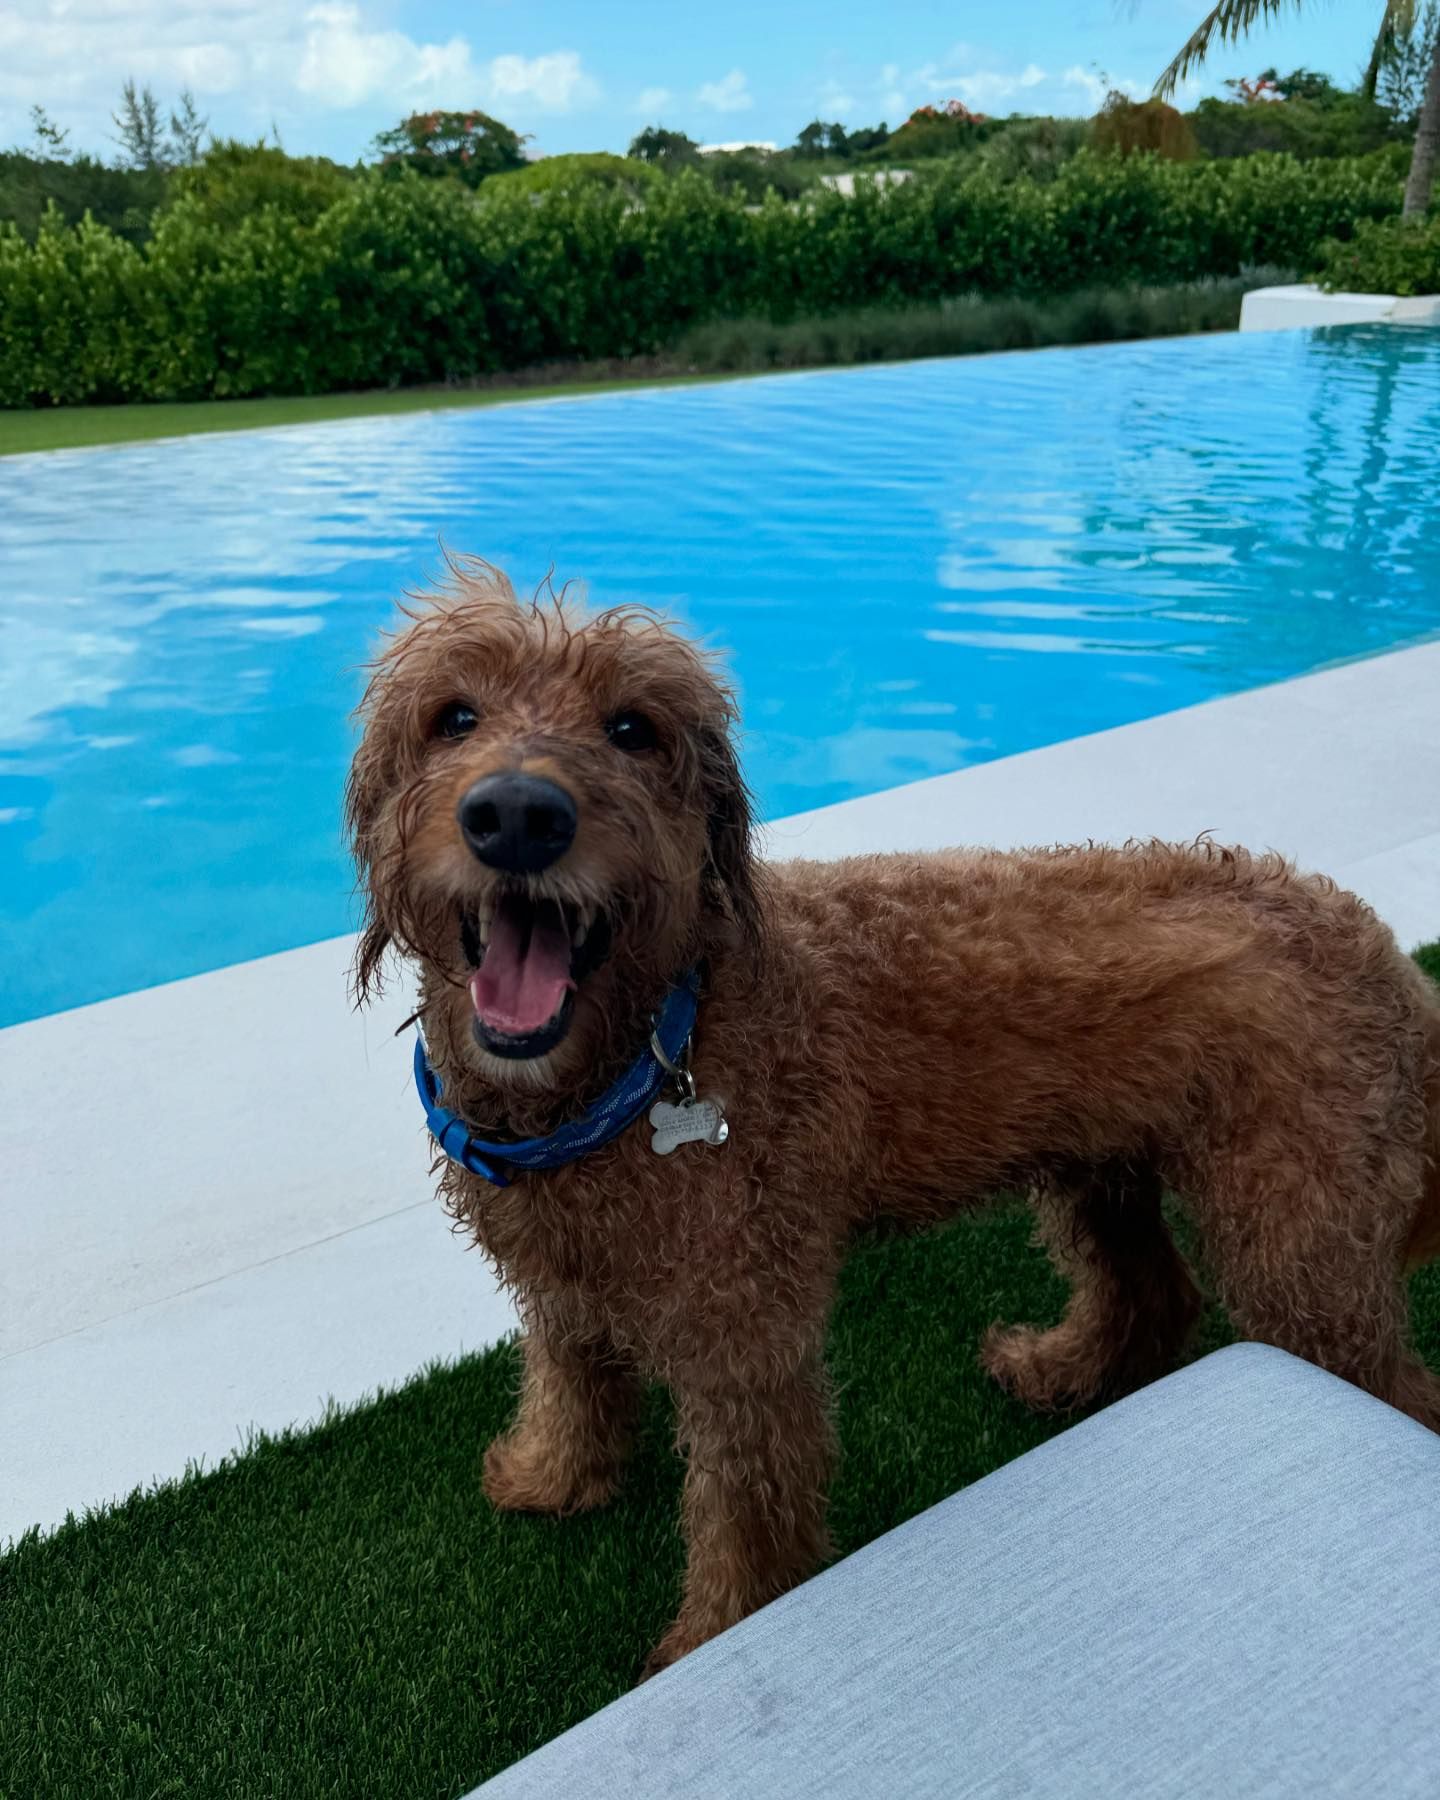 Isabella Strahan also snapped a photo of of the family dog, Enzo, by the pool